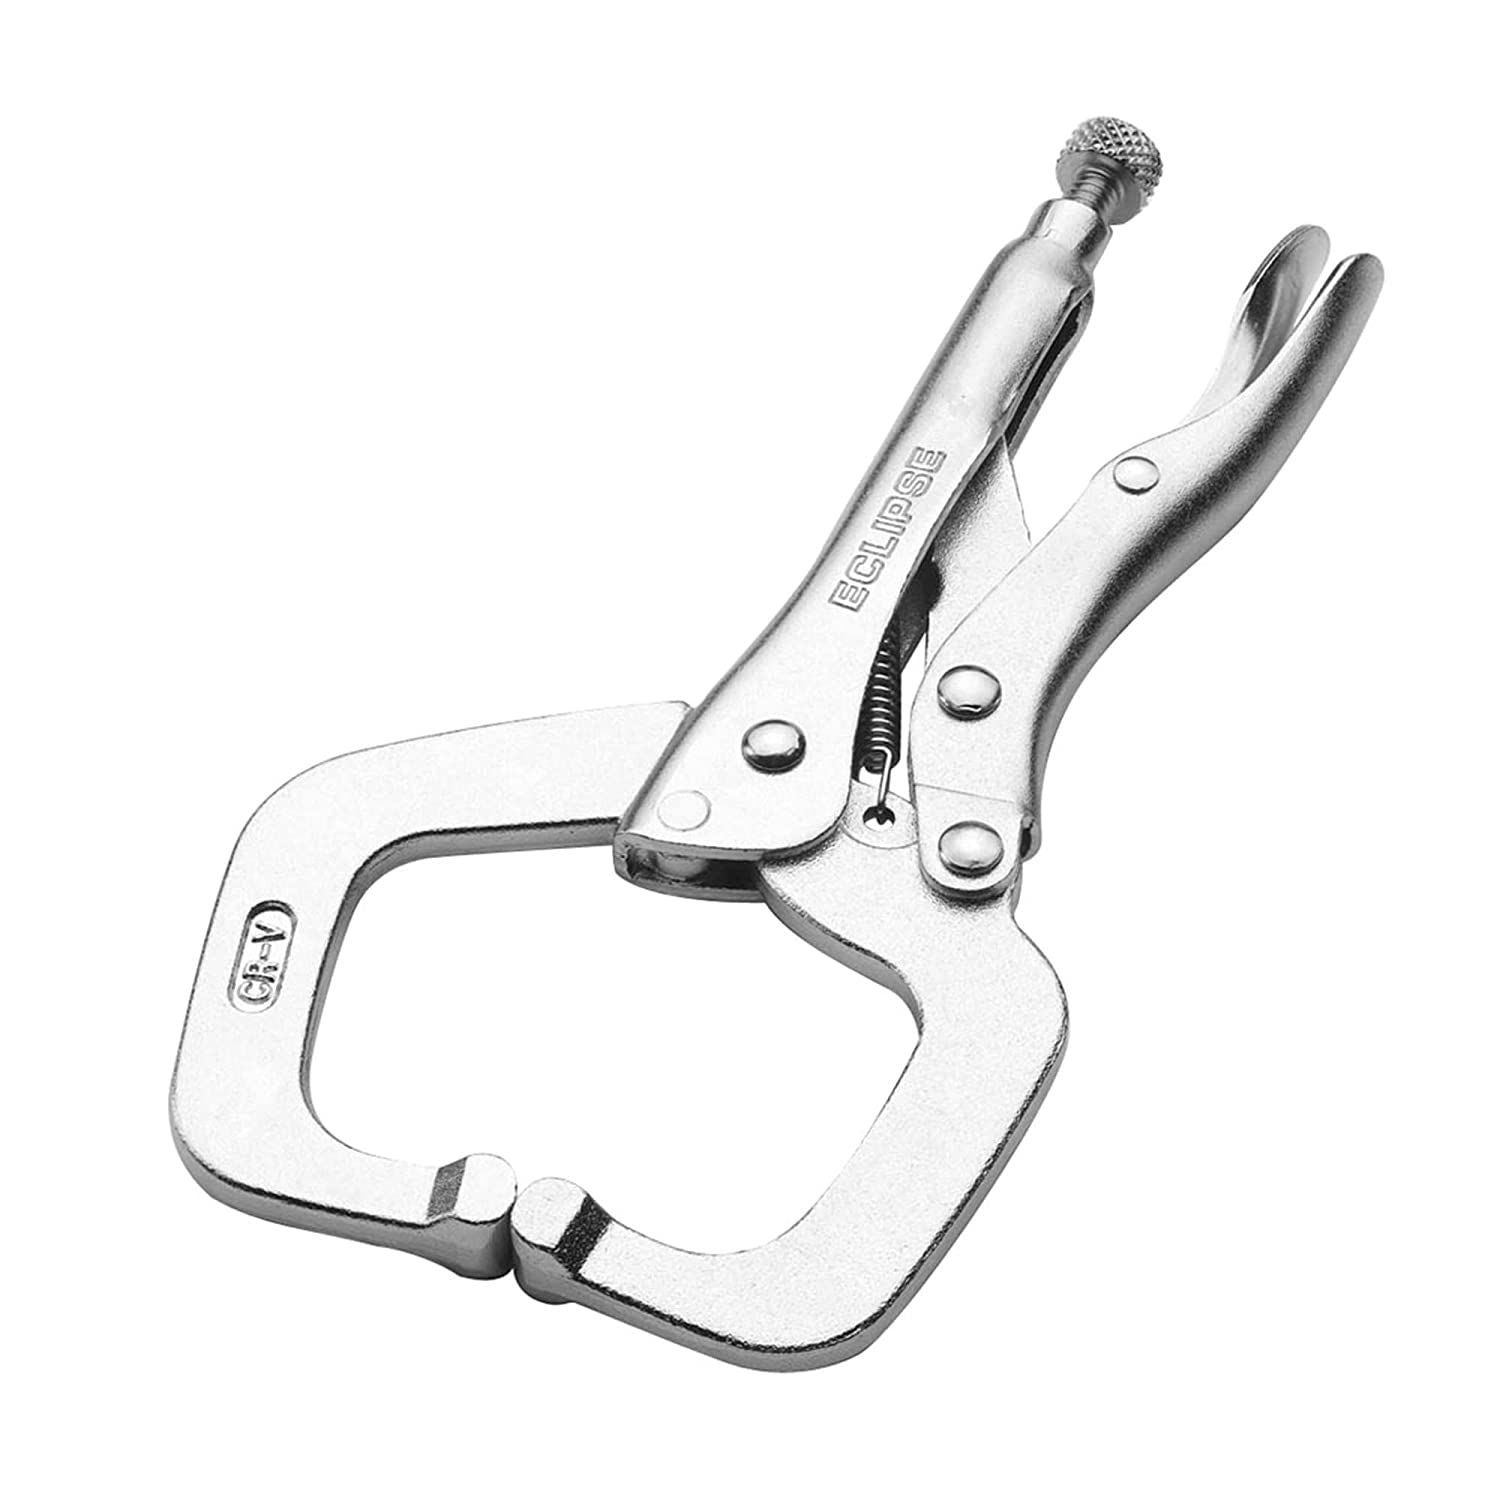 Locking C-Clamp Pliers with Regular Pads, 11" Size, 3-1/8" Jaw Capacity